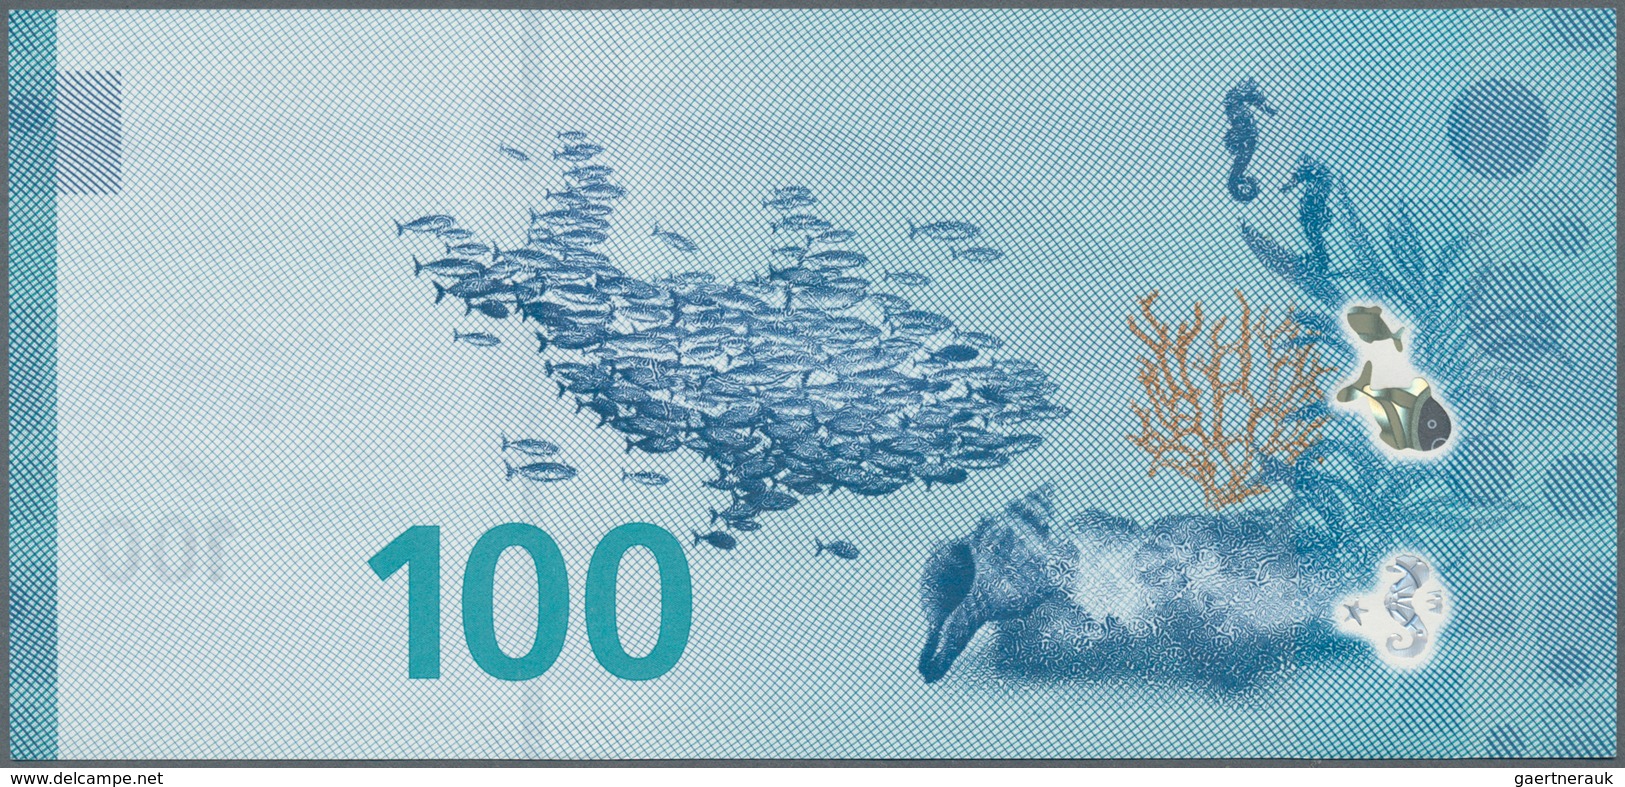 Testbanknoten: Test Note By Louisenthal “100 Water Note” 2017 With The RollingStar LEAD Foil And Rol - Fiktive & Specimen